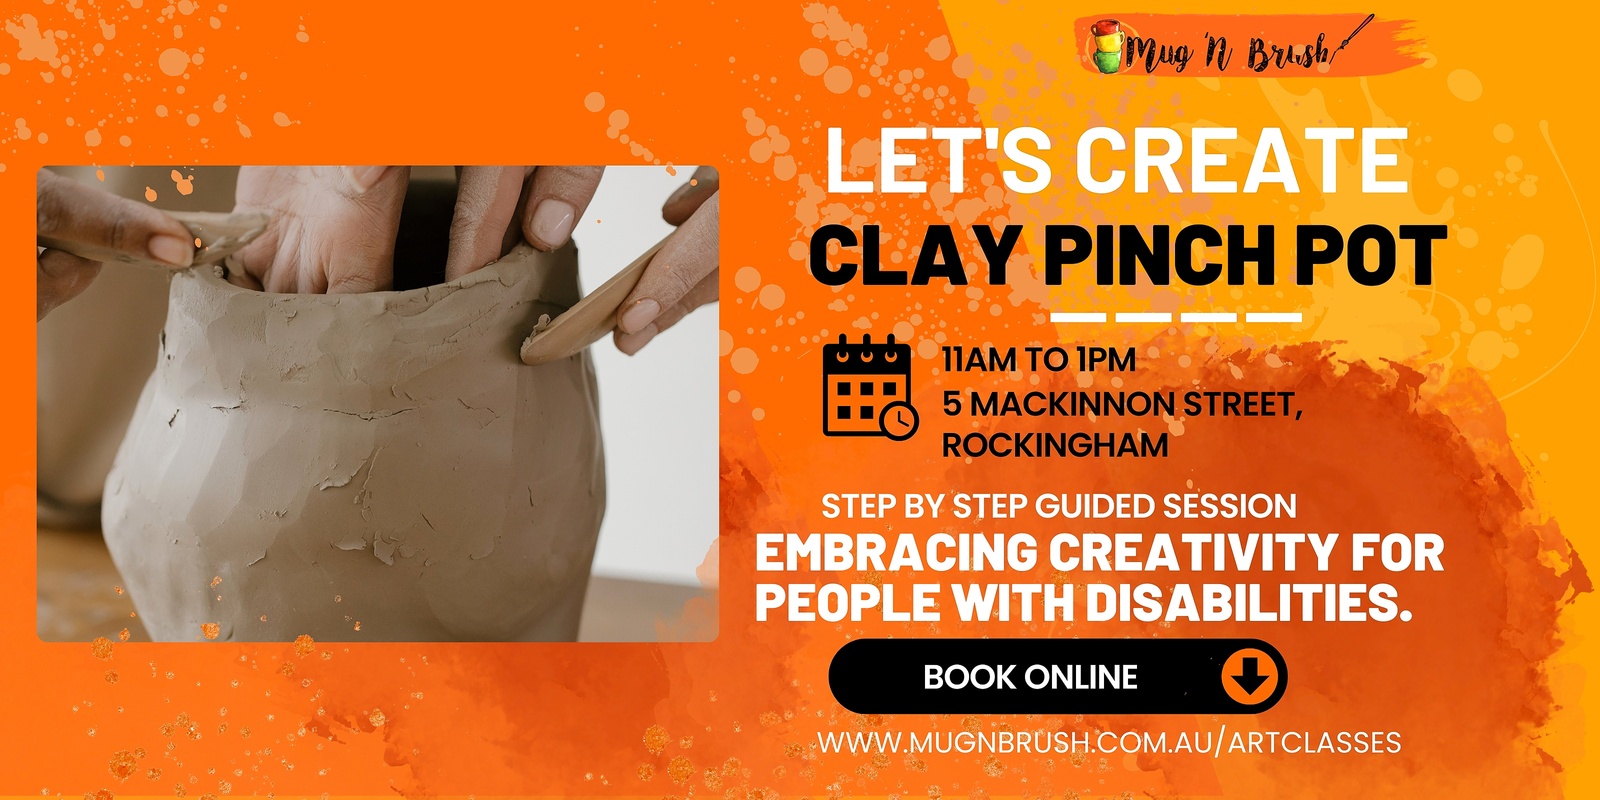 Banner image for Lets Create - Clay Pinch Pot -  Embracing Creativity for people with disabilities session